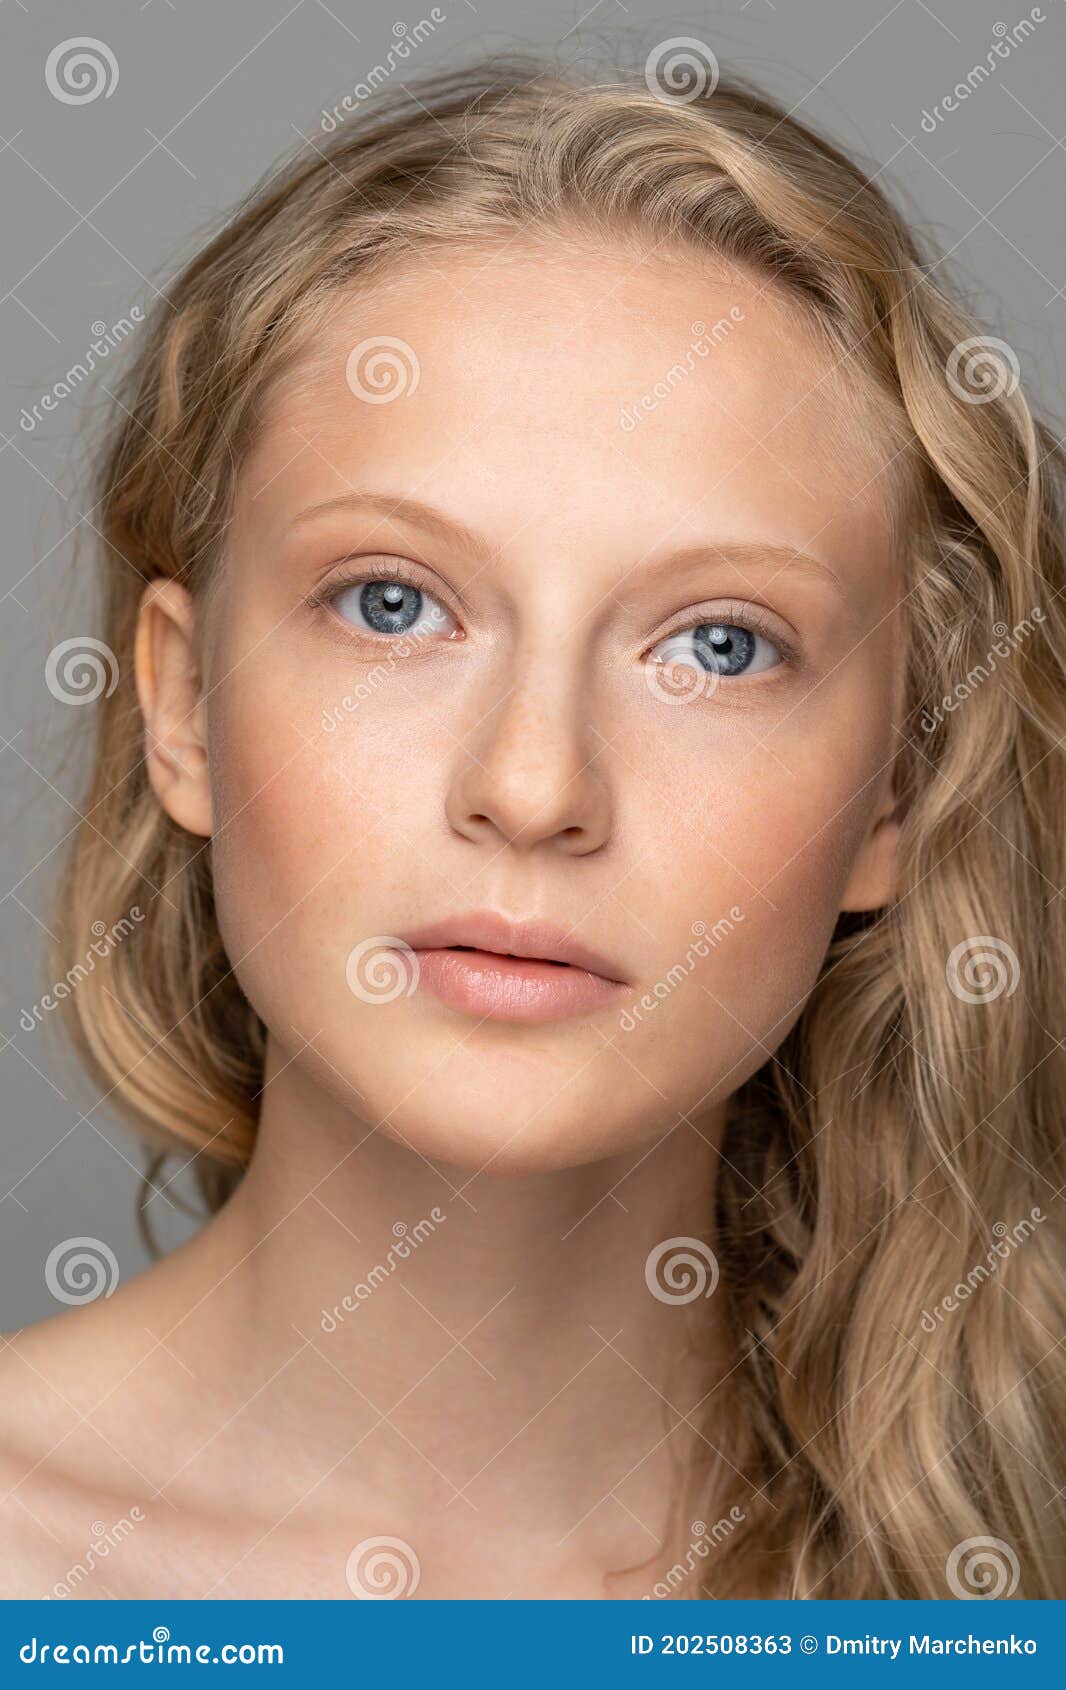 Young Woman Face with Blue Eyes, Curly Natural Blonde Hair and Eyebrows ...